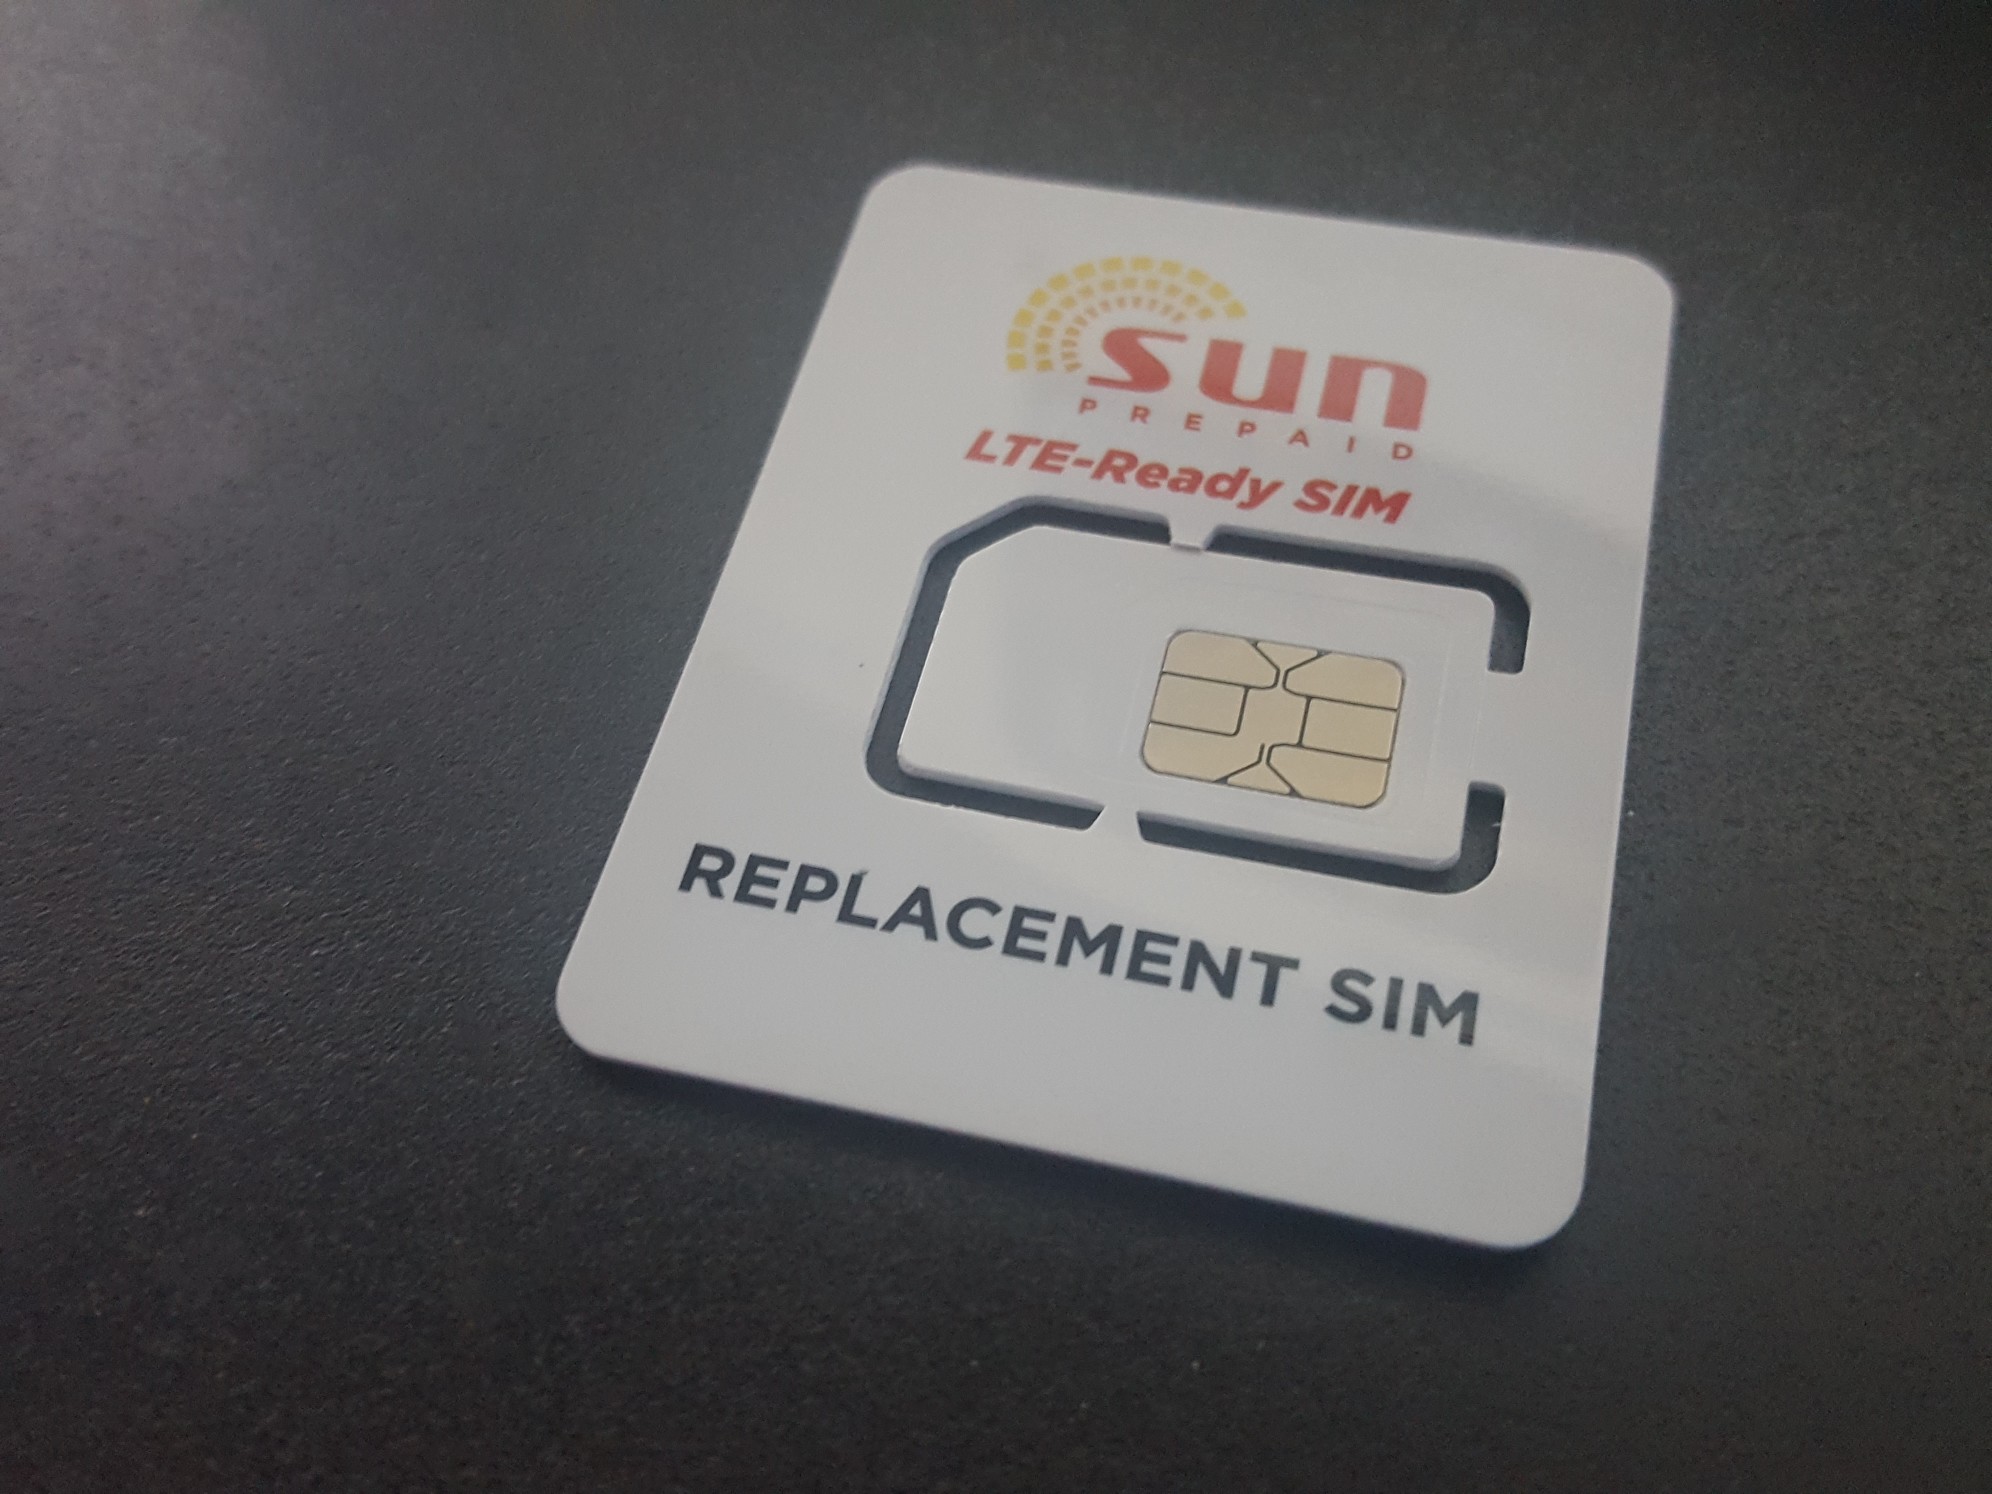 Upgrade your SUN Sim to the Newest LTE SIM for FREE